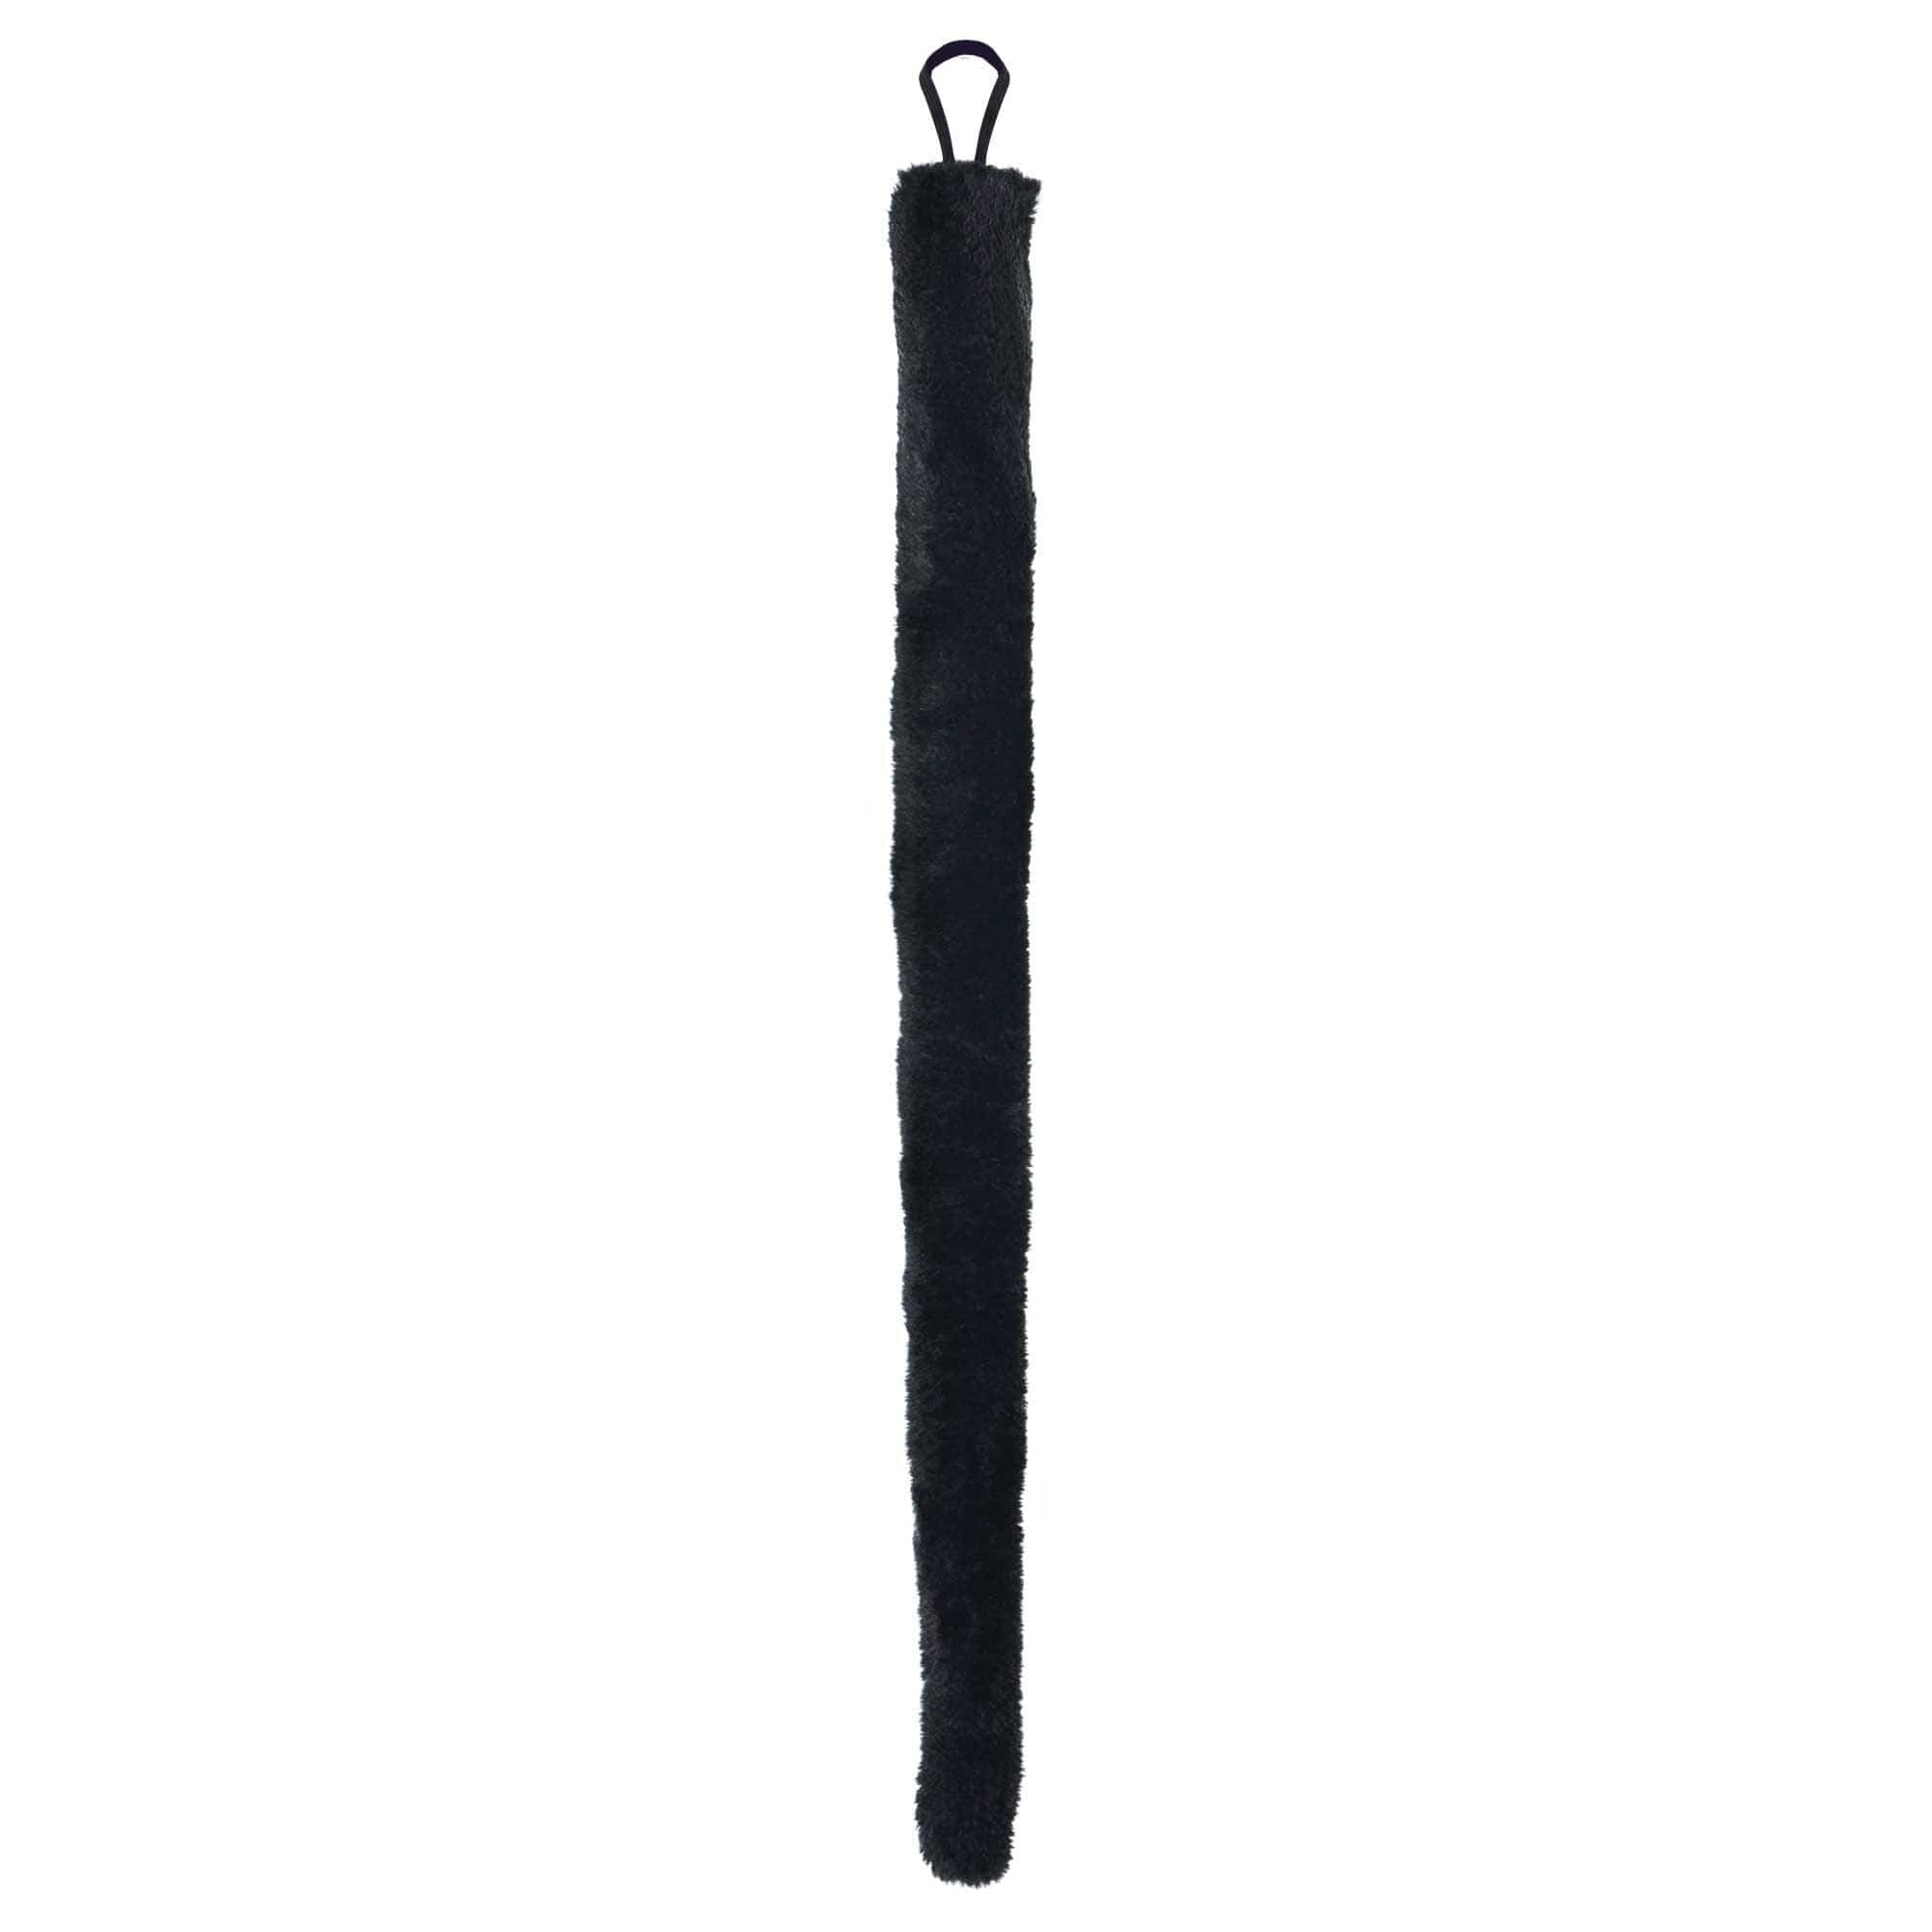 Amscan COSTUMES: ACCESSORIES Black Cat/Mouse Tail